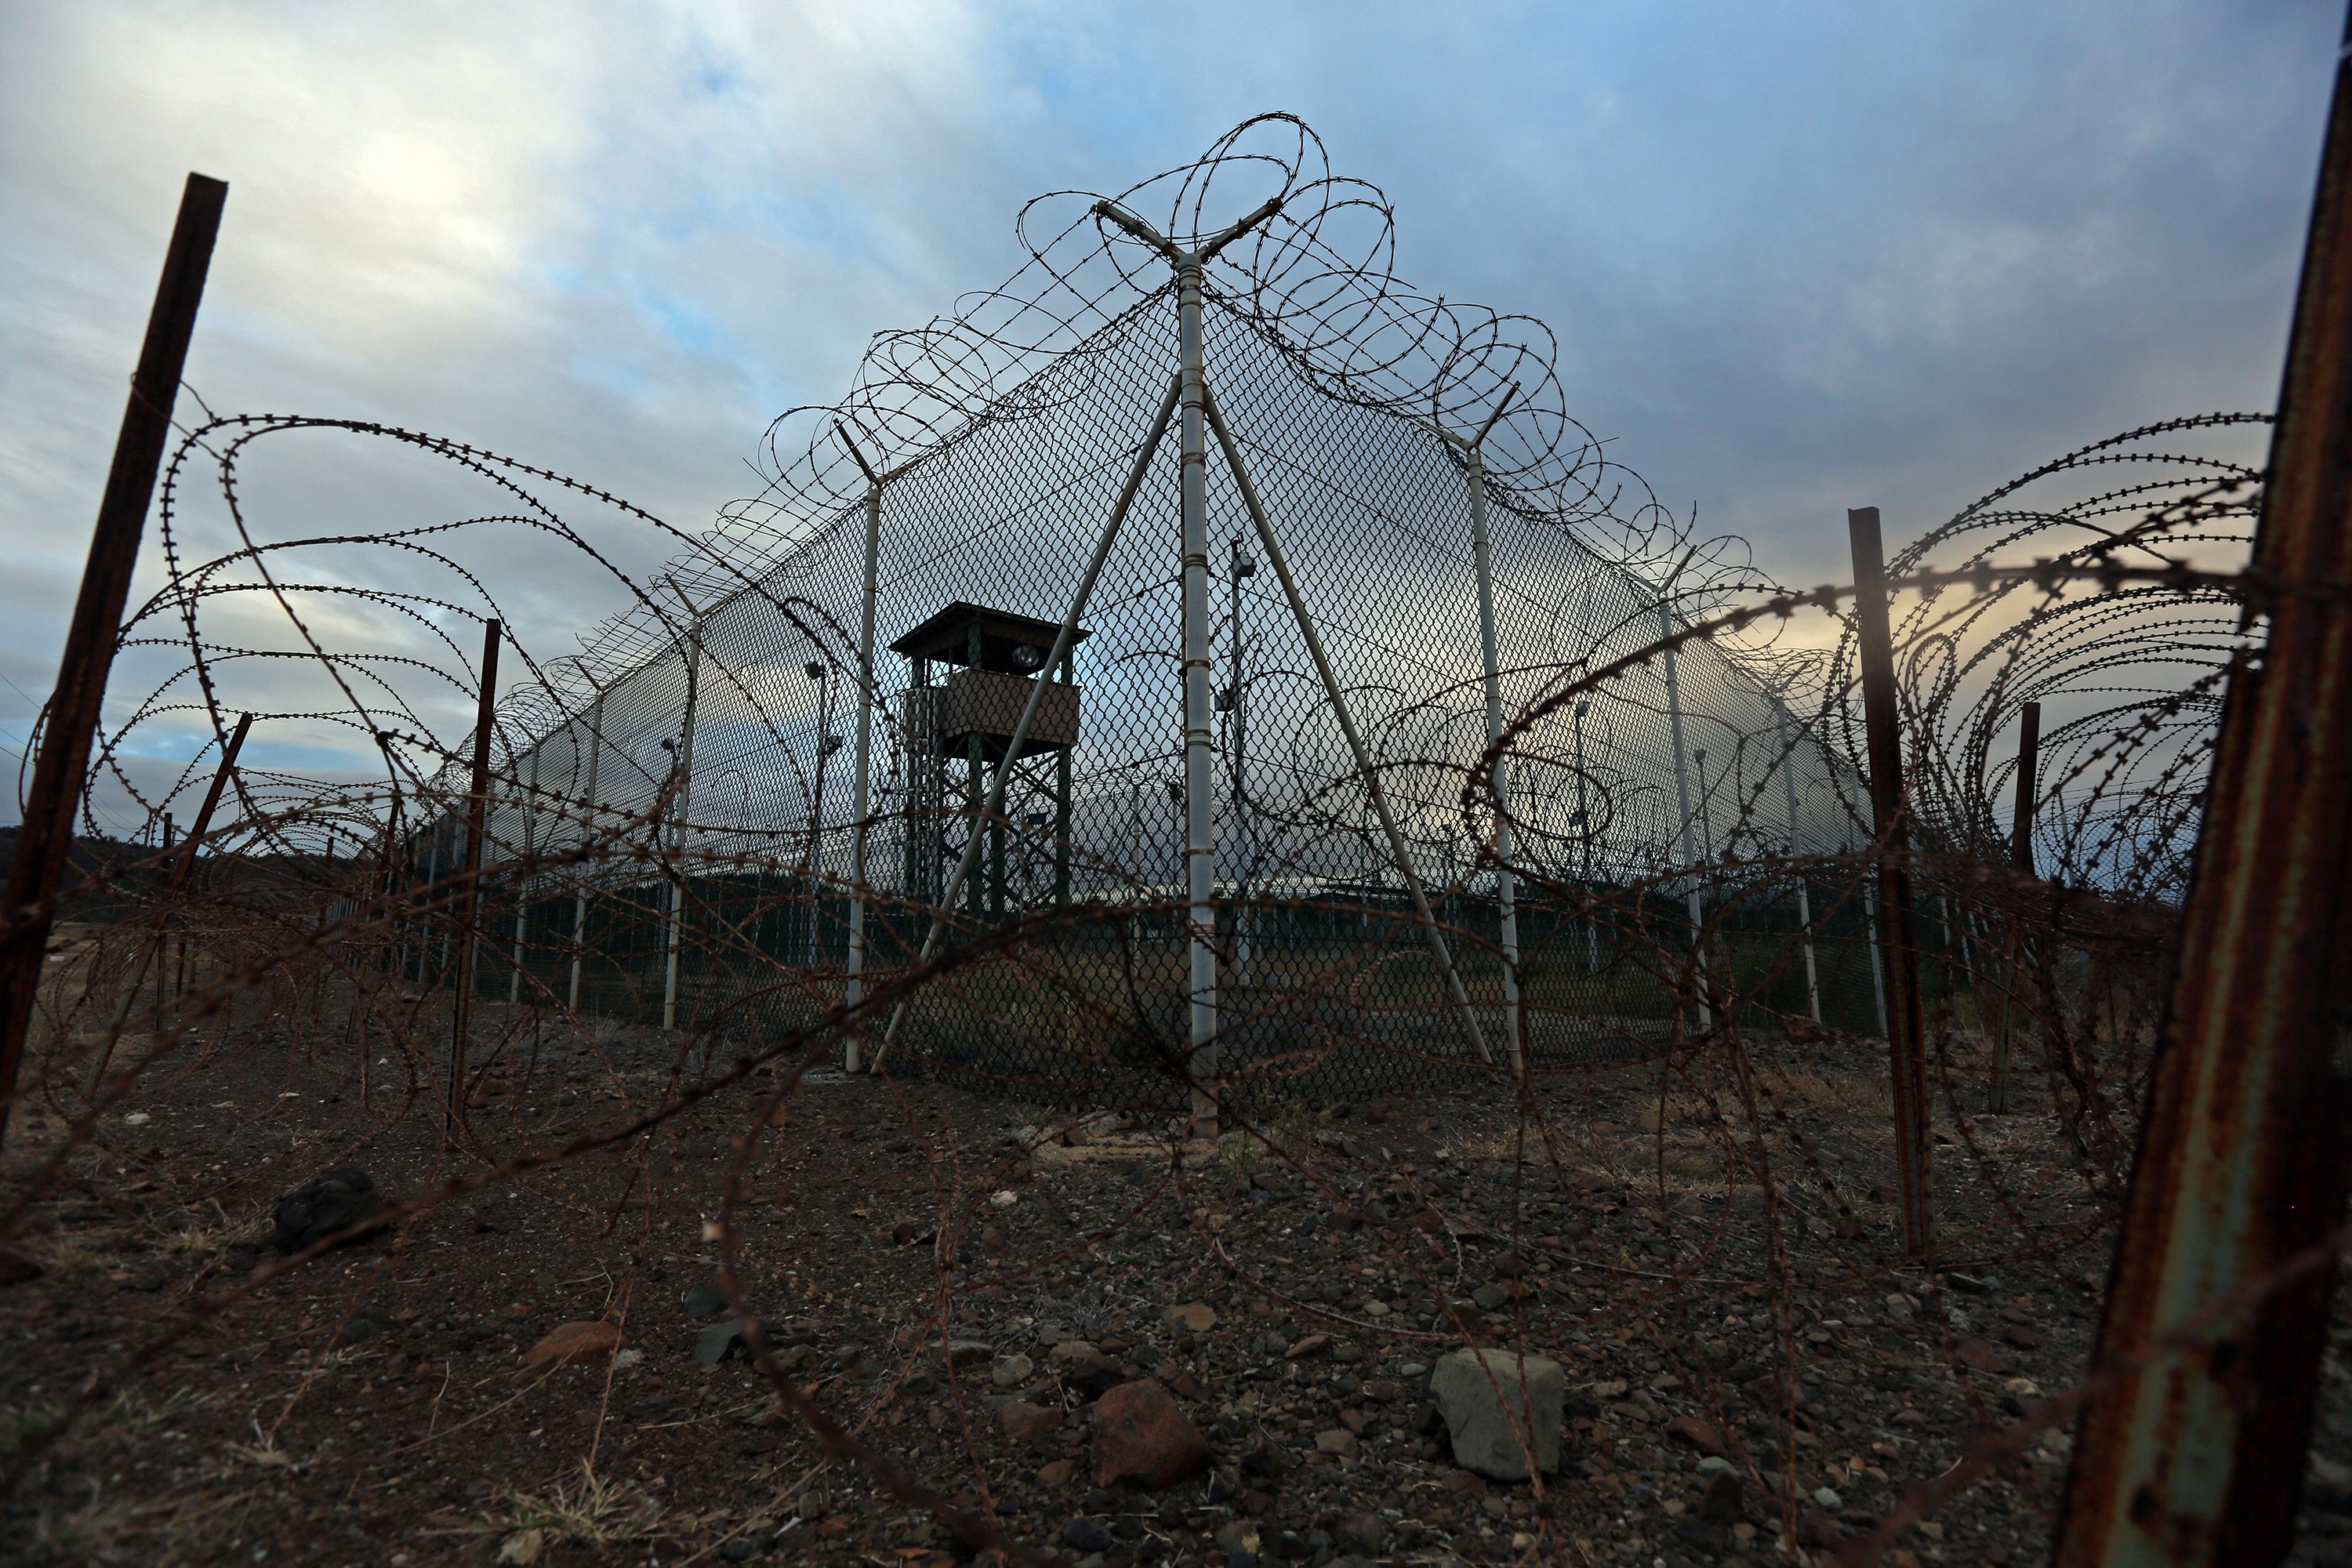 An unstaffed tower in an abandoned portion of the Guantanamo Bay Detention Centre Zone. Photo: TNS